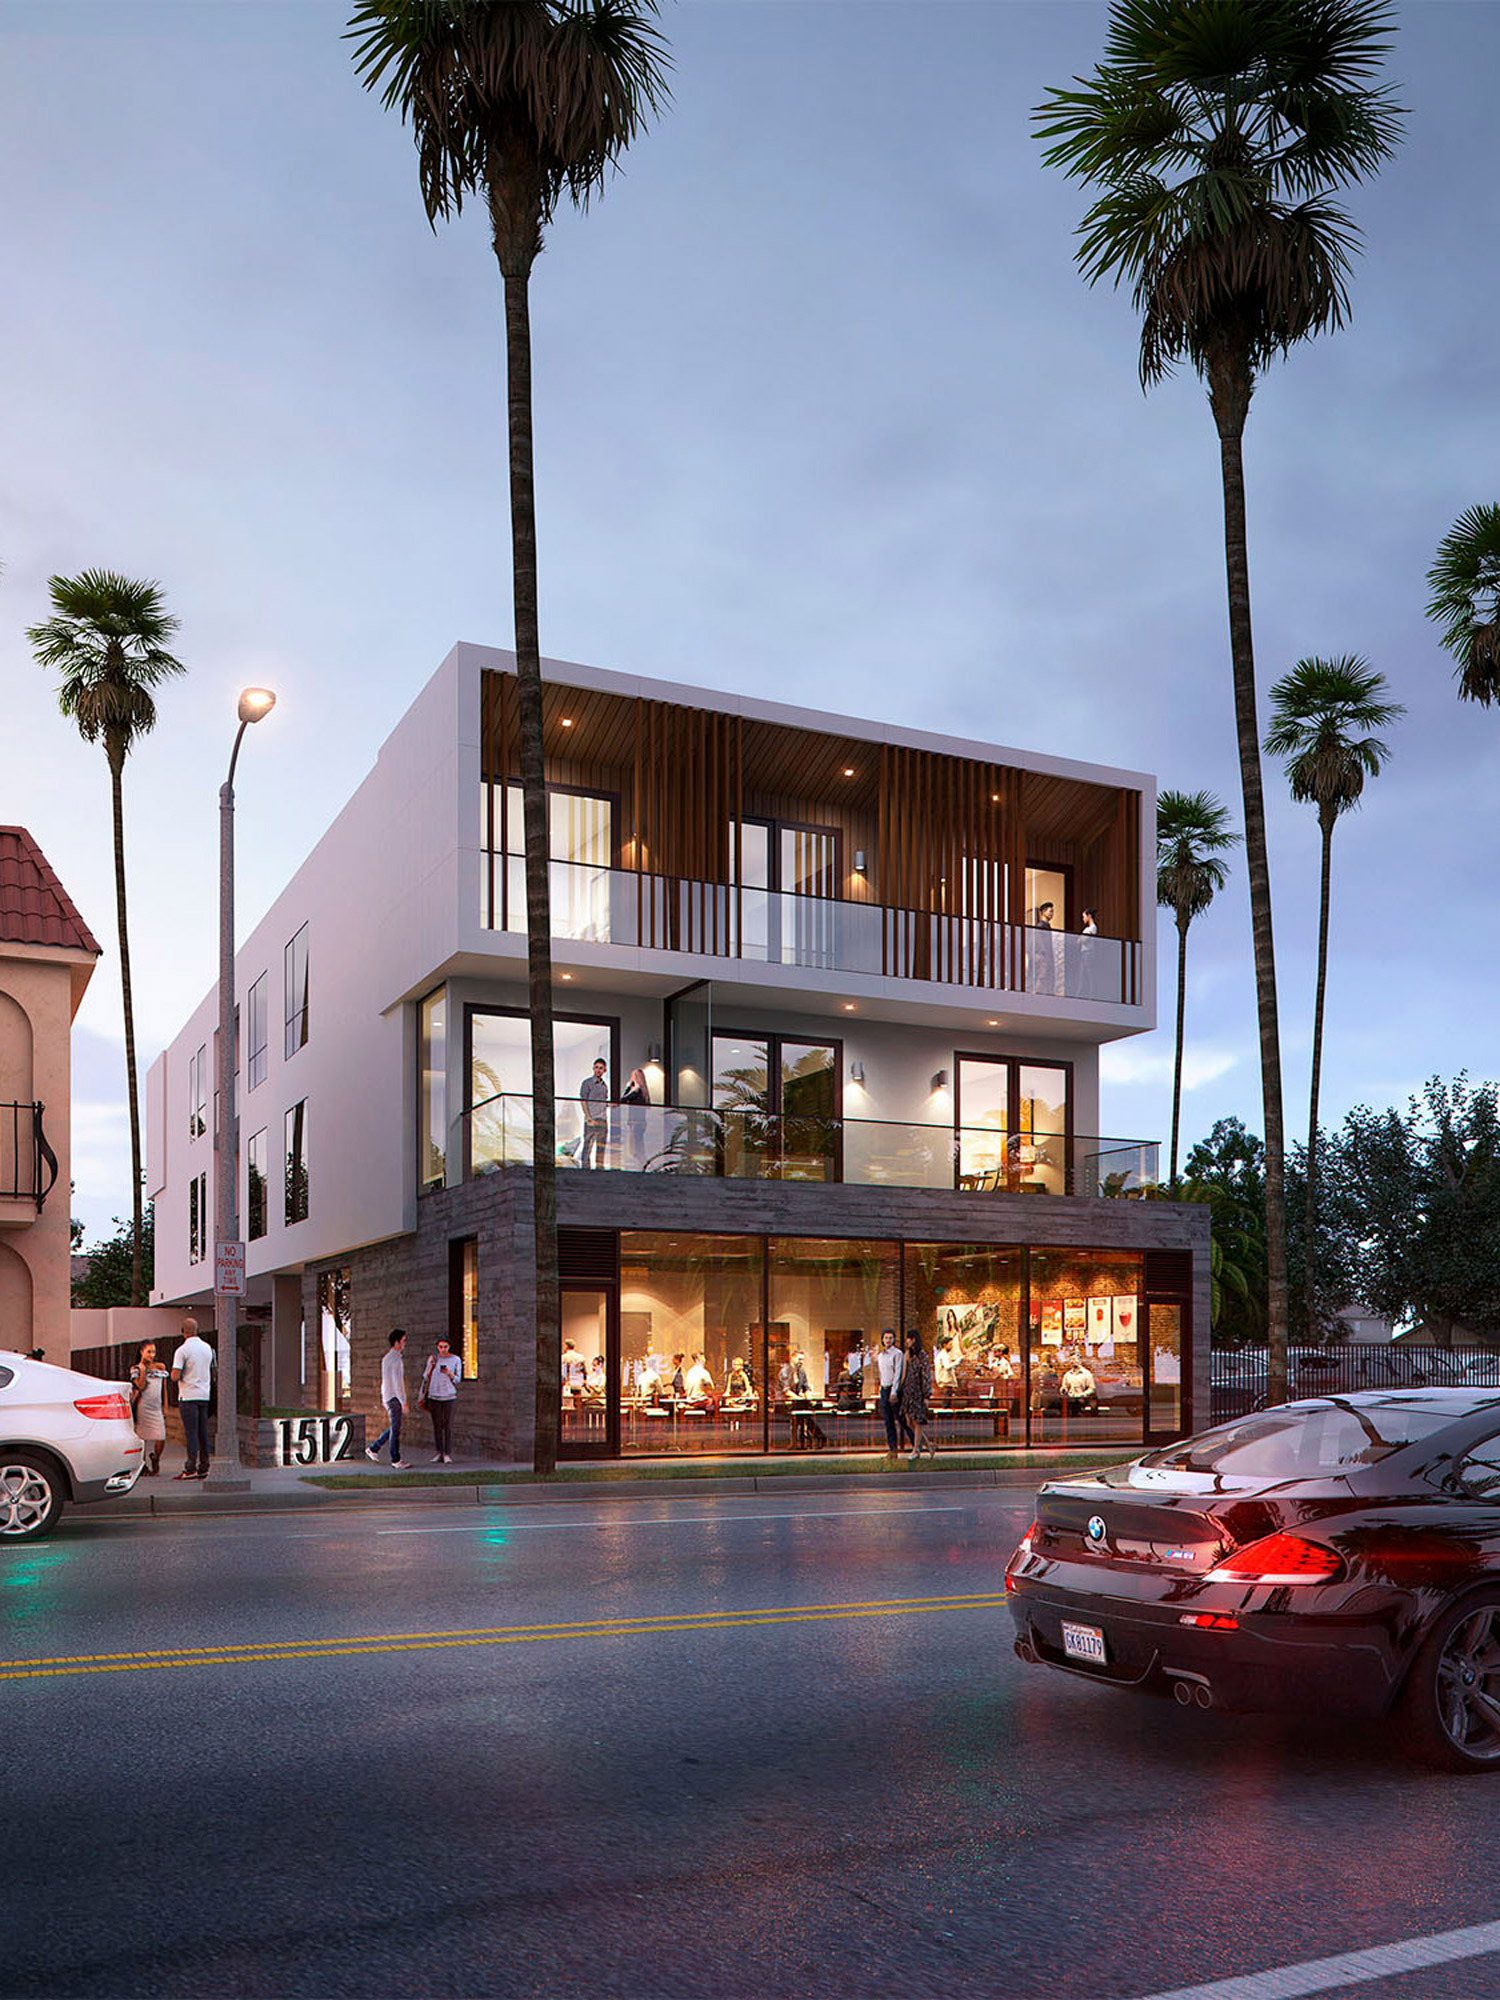 Modern multi-level building at dusk with illuminated interiors, showcasing clean lines and expansive glass windows. Abundant natural light accentuates the open-plan design, which blends commercial spaces on the lower floors with residential balconies above, framed by mature palm trees.